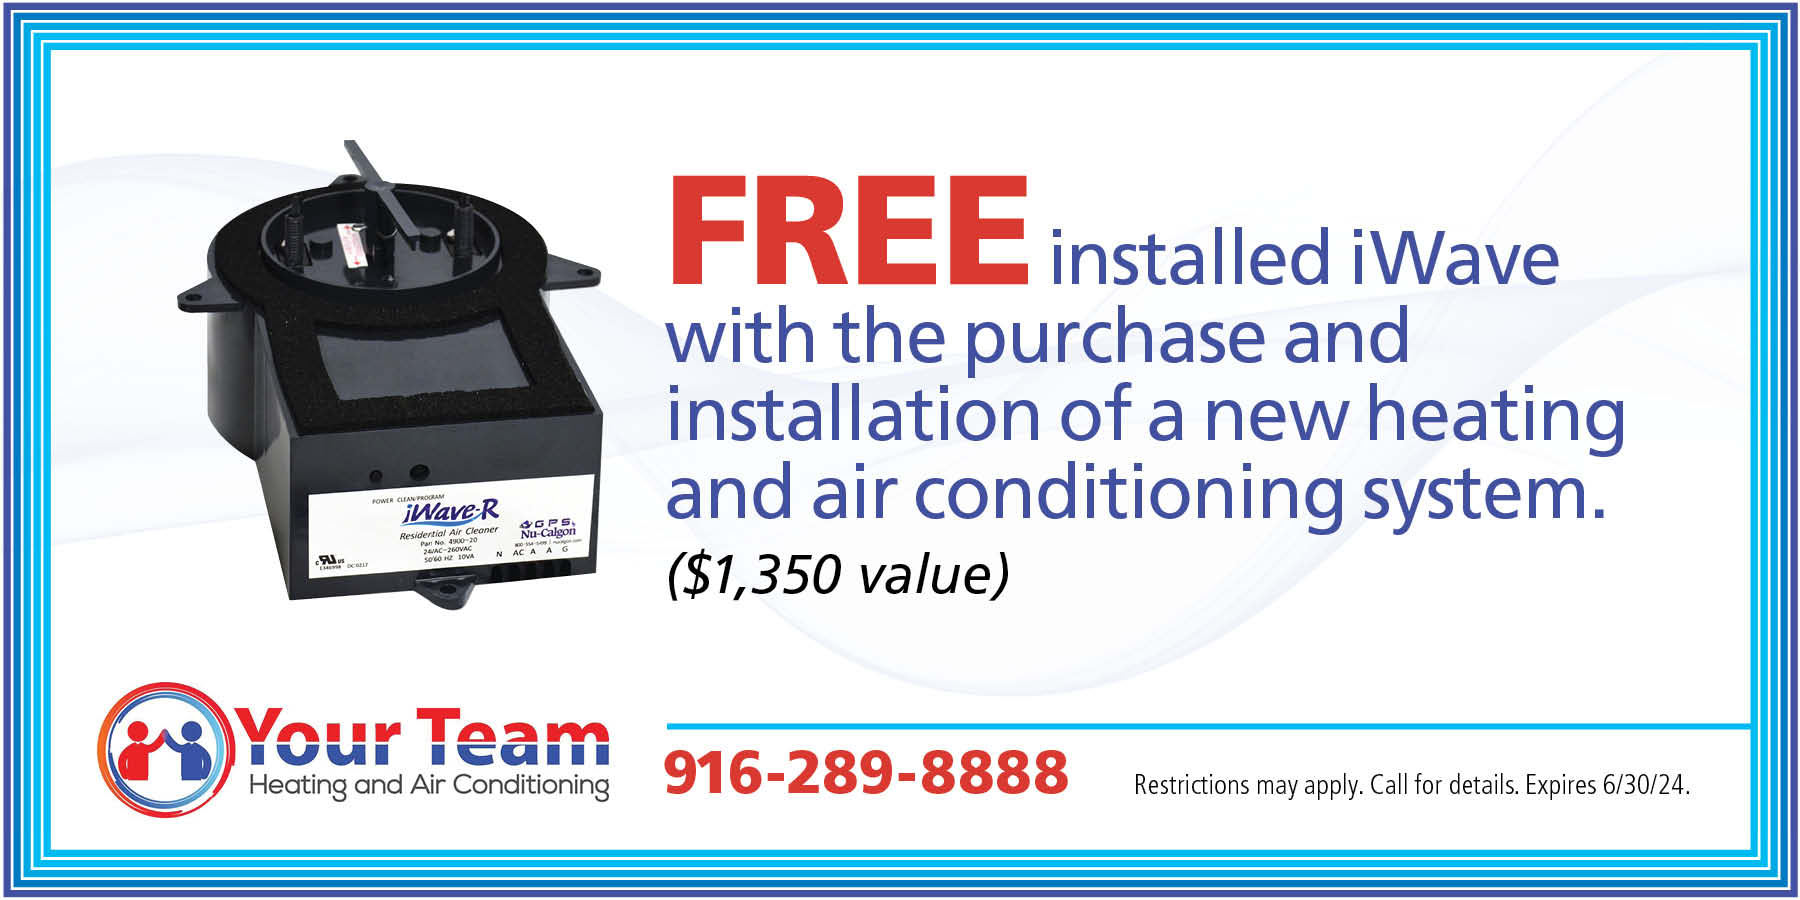 Free installed iWave with the purchase and installation of a new heating and air conditioning system.